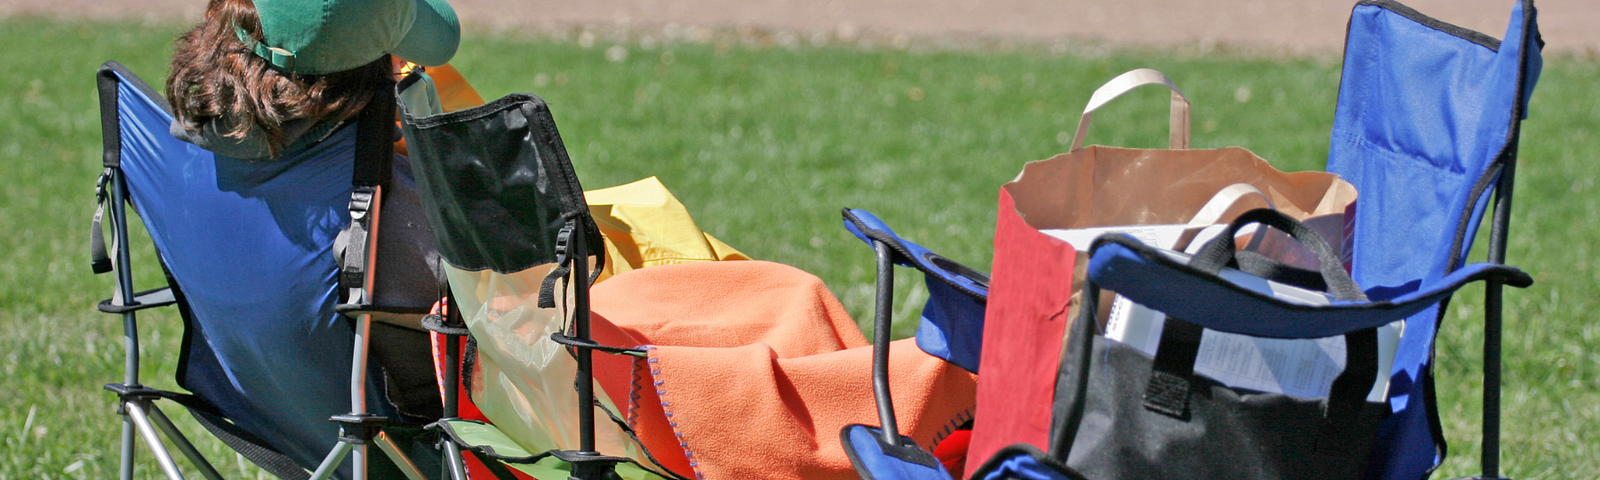 Image from behind of a person in green baseball hat sleeping in fold-up outdoor chairs. There is a trophy graphic superimposed on the image and a text banner reading: “The Stealth Sleeper Award.”